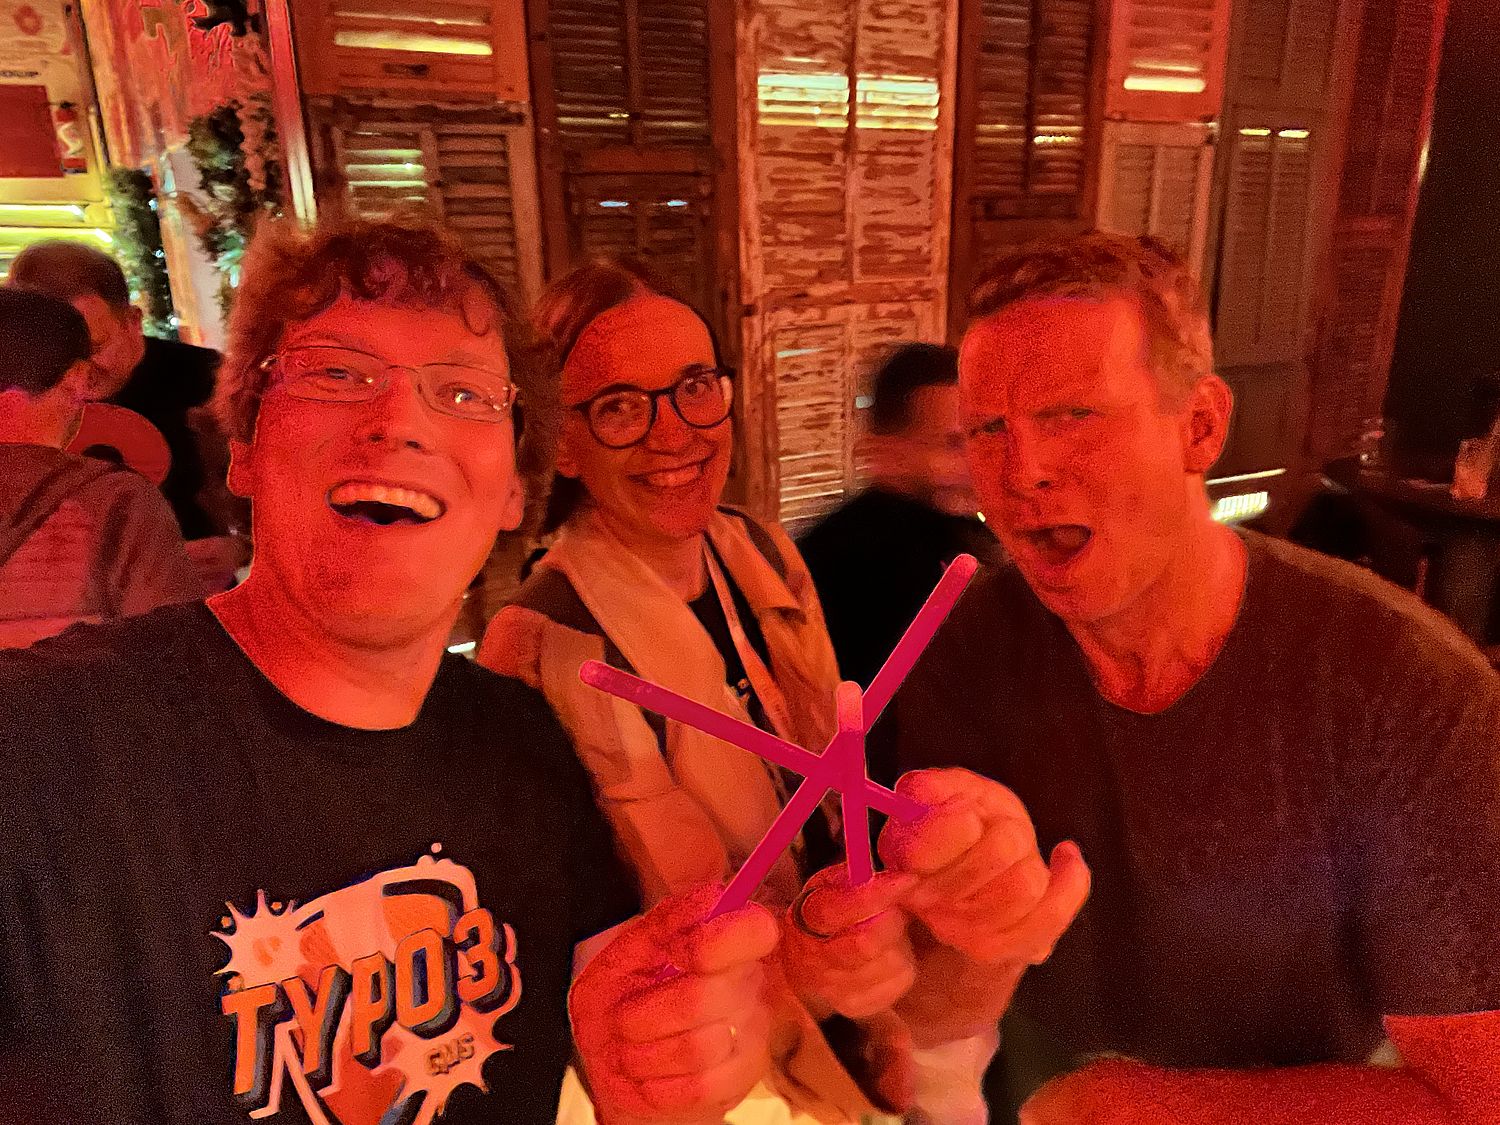 A woman and two men holding party sticks together as if they were swords.